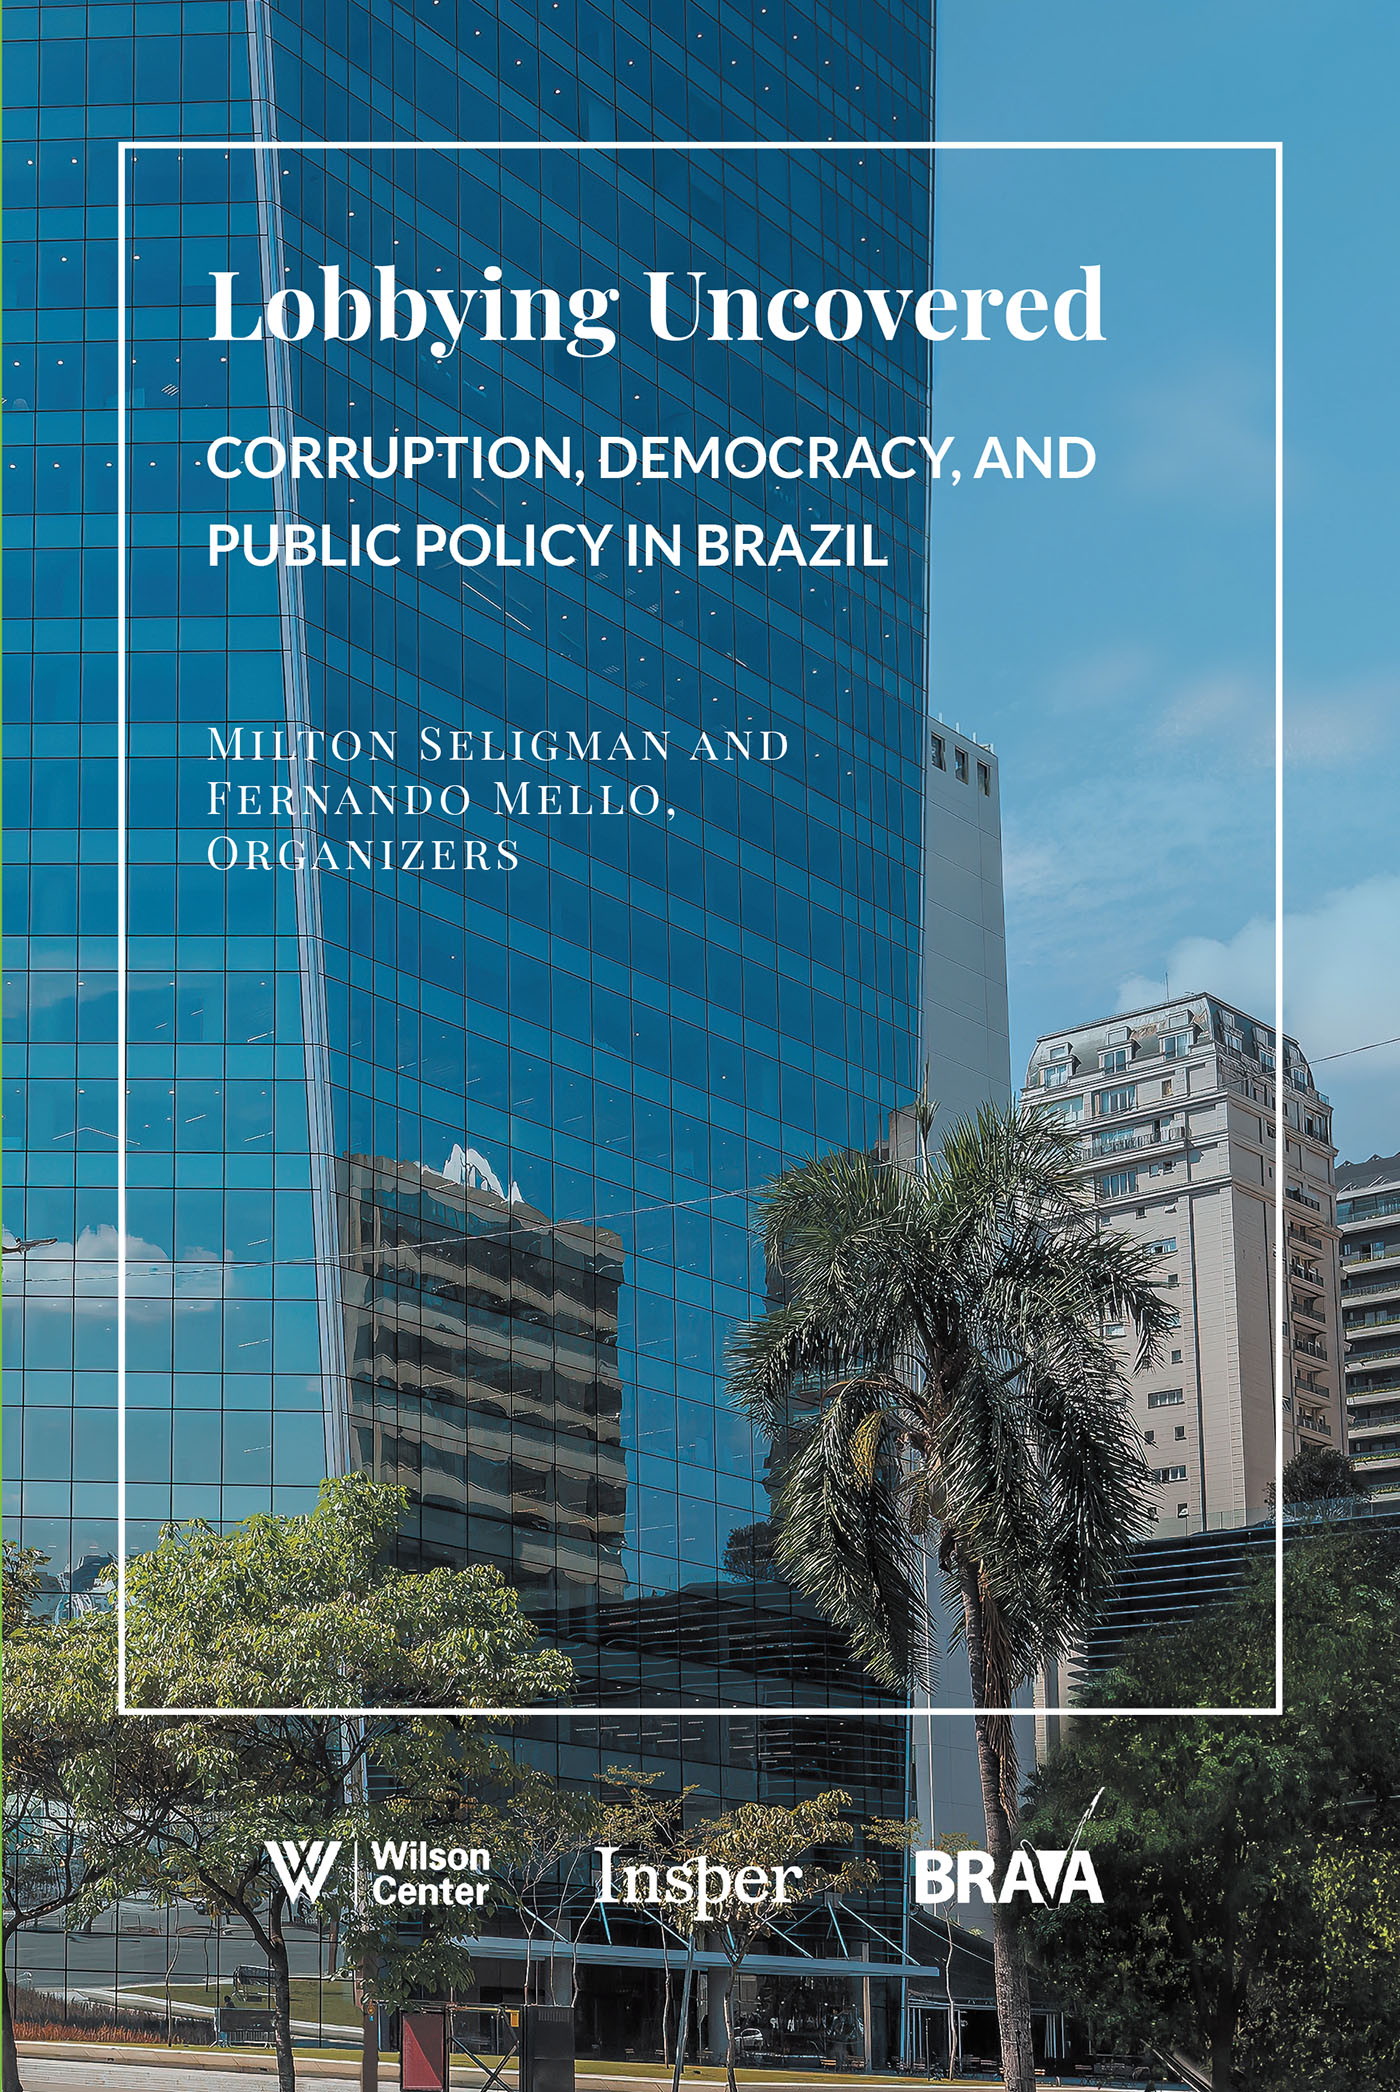 Authors Milton Seligman and Fernando Mello, Organizers’ New Book, "Lobbying Uncovered: Corruption, Democracy, and Public Policy in Brazil," Explores Quality Control